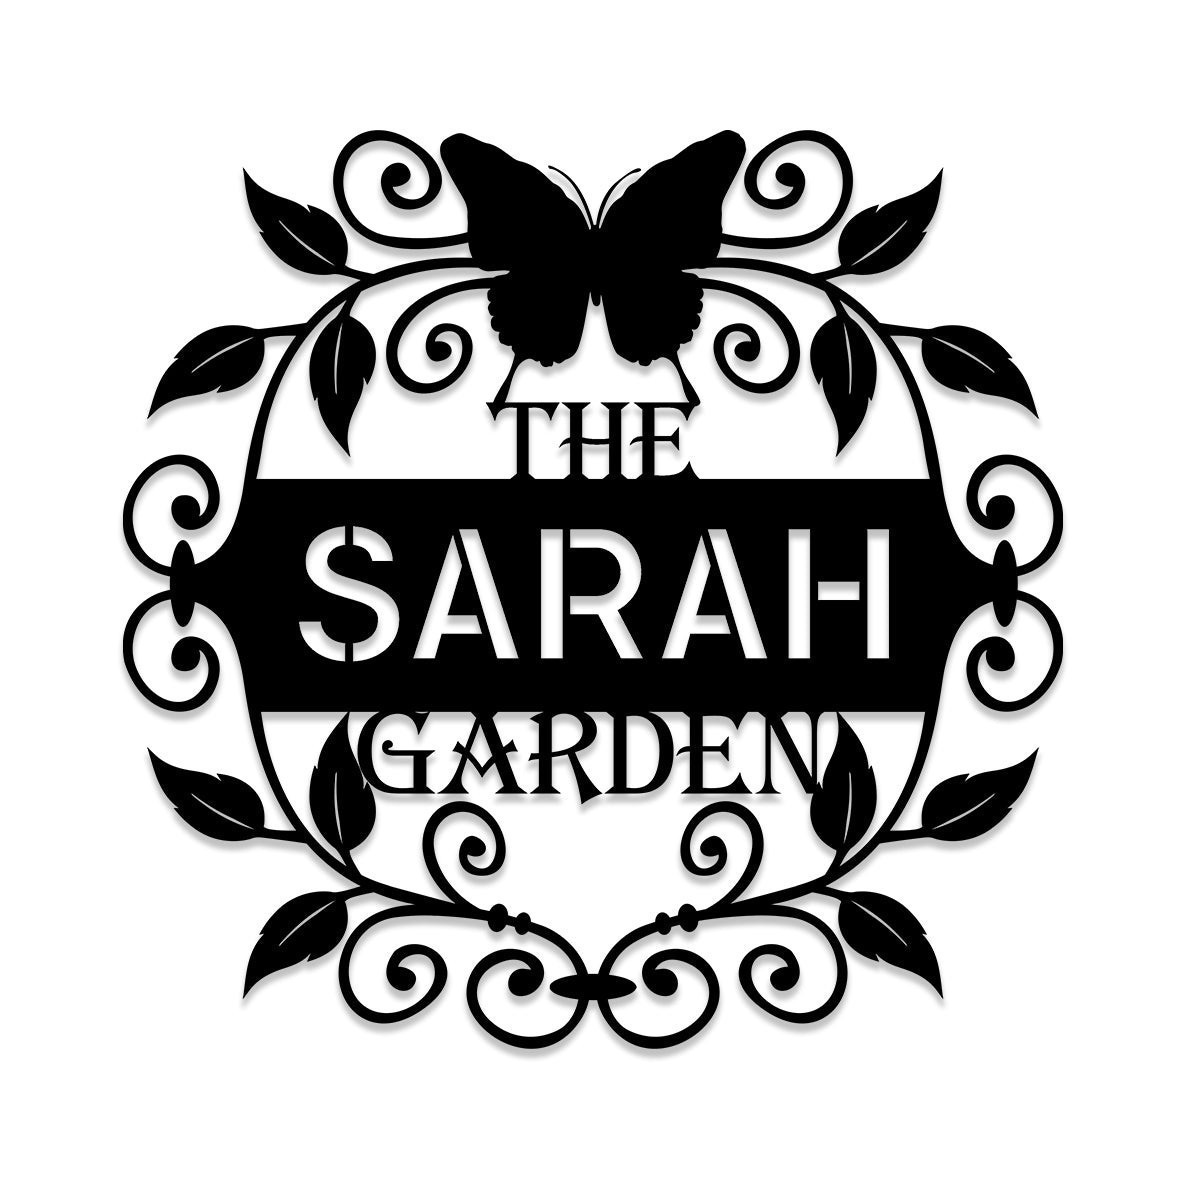 Personalized Metal Garden Sign, Home Decor, Wedding Gift For Her, Gardening Lovers, Metal Laser Cut Metal Signs Custom Gift Ideas 12x12IN